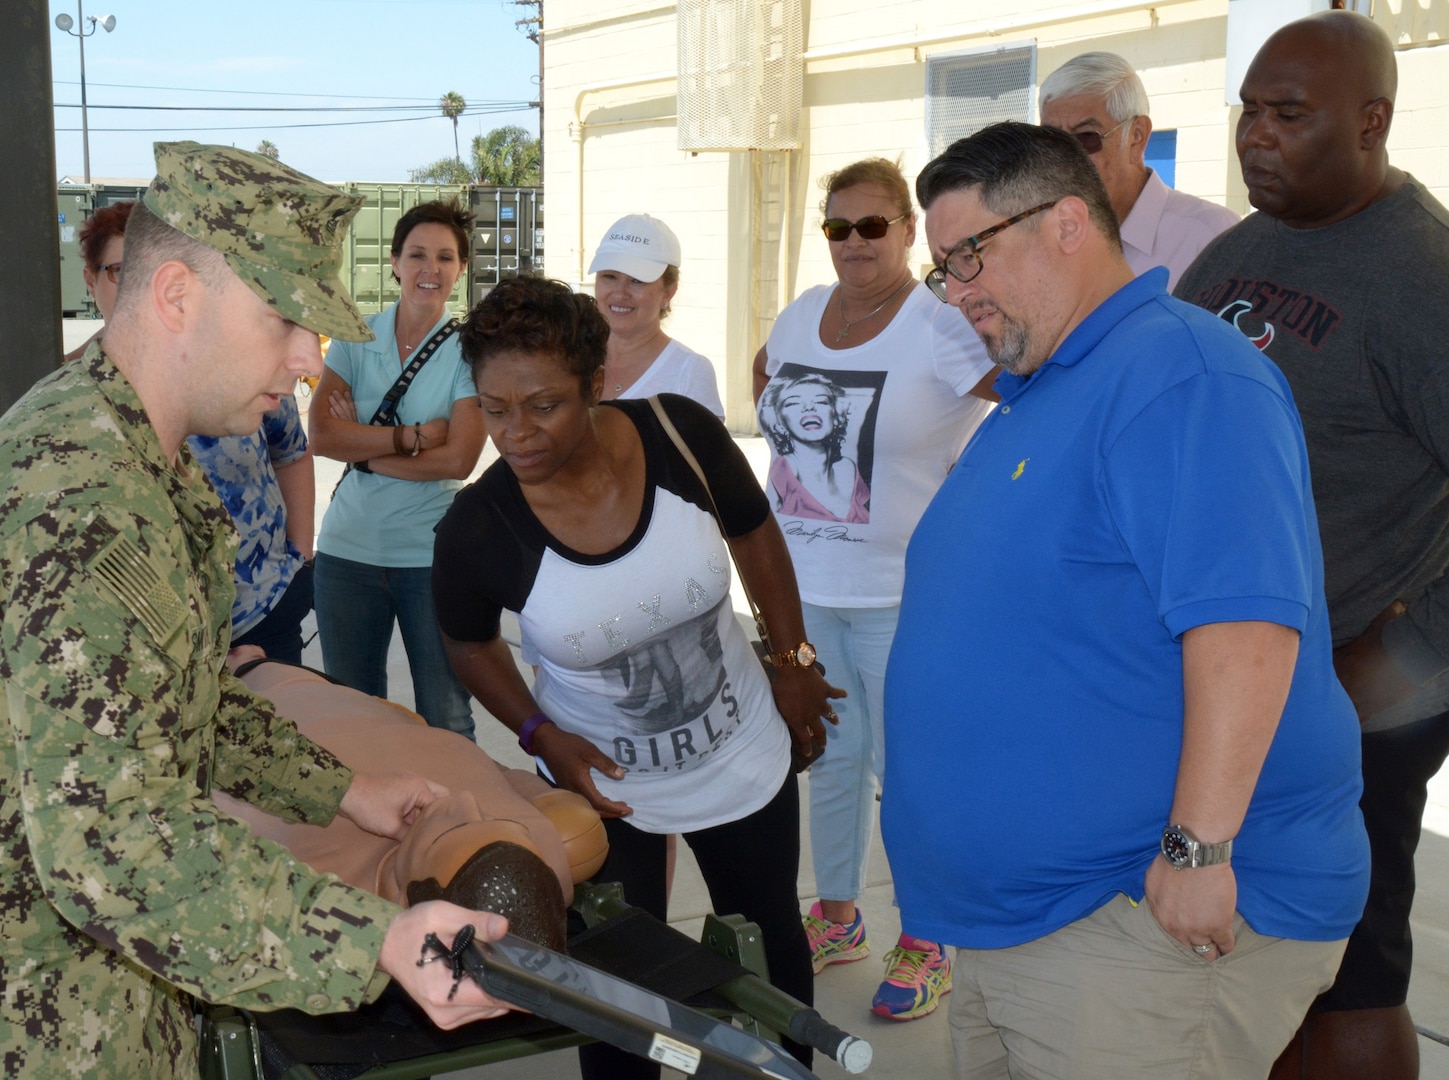 Petty Officer 1st Class Joshua Smith, assigned to Coastal Riverine Group ONE, demonstrates treatment of medical casualties utilizing a Caesar Medical Manikin to educators from South Texas during Navy Recruiting District San Antonio’s annual Educators Orientation Visit, or EOV.  Smith, a native of Arlington, Texas, is a 2003 graduate of Arlington High School.   The EOV is a Navy Recruiting Command program with a main focus of showing educators the various facets of the Navy and the many career paths available to students.